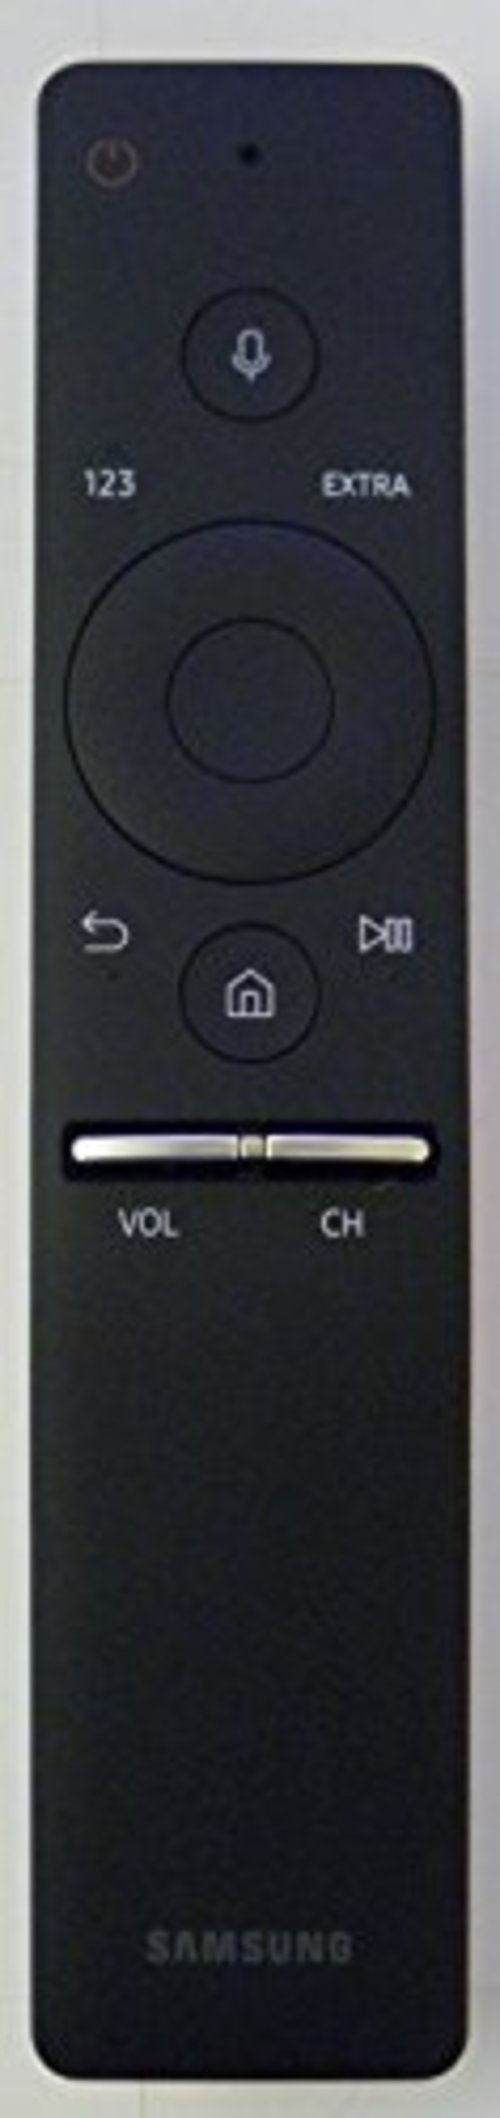 Samsung BN59-01241A LED HDTV Remote Control - 2 x AA - Batteries Not Included